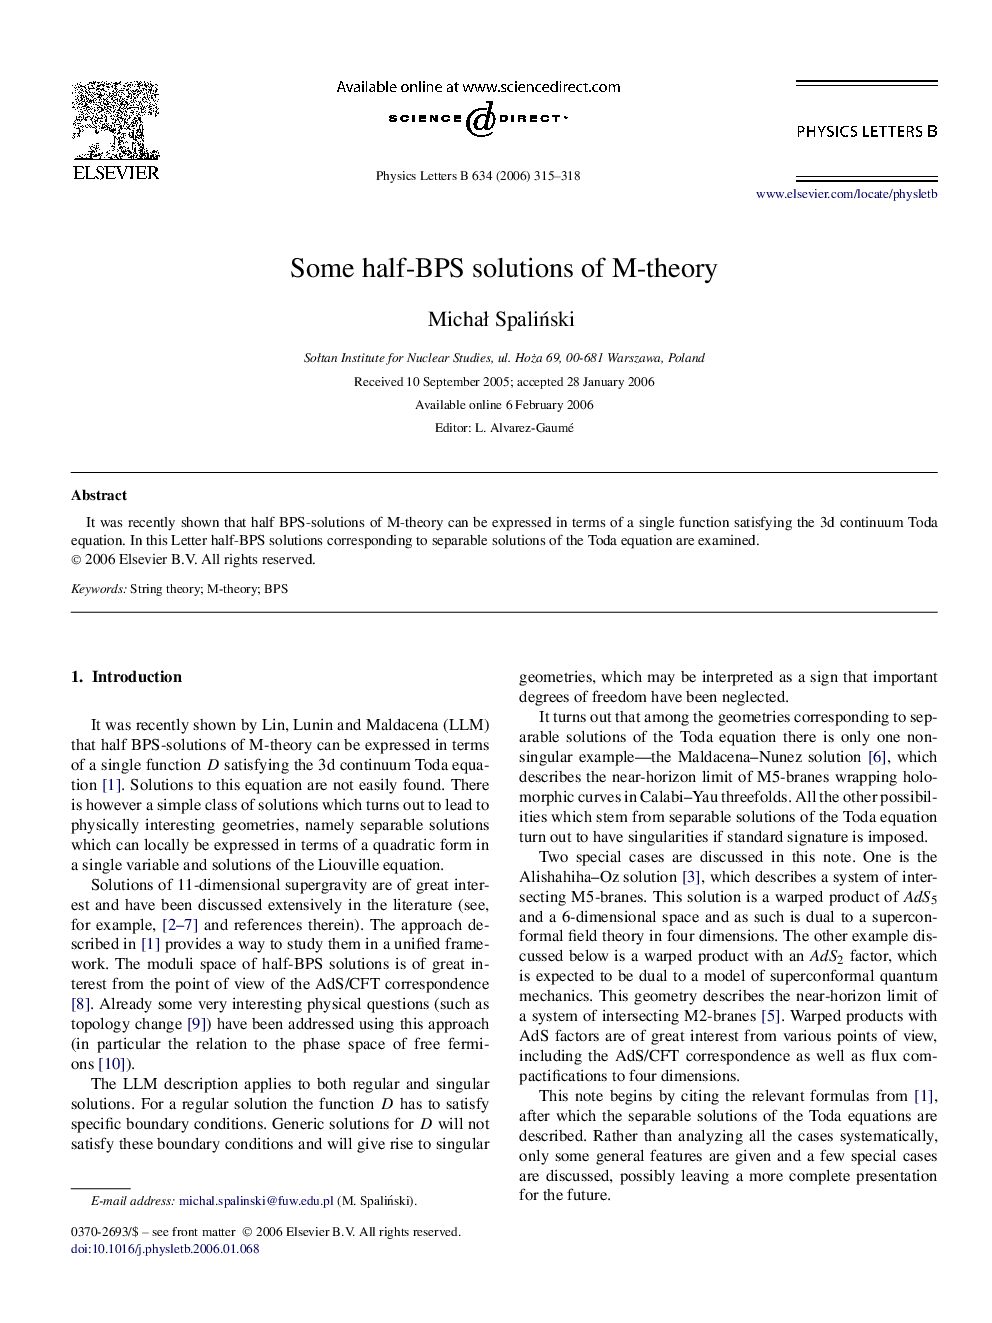 Some half-BPS solutions of M-theory